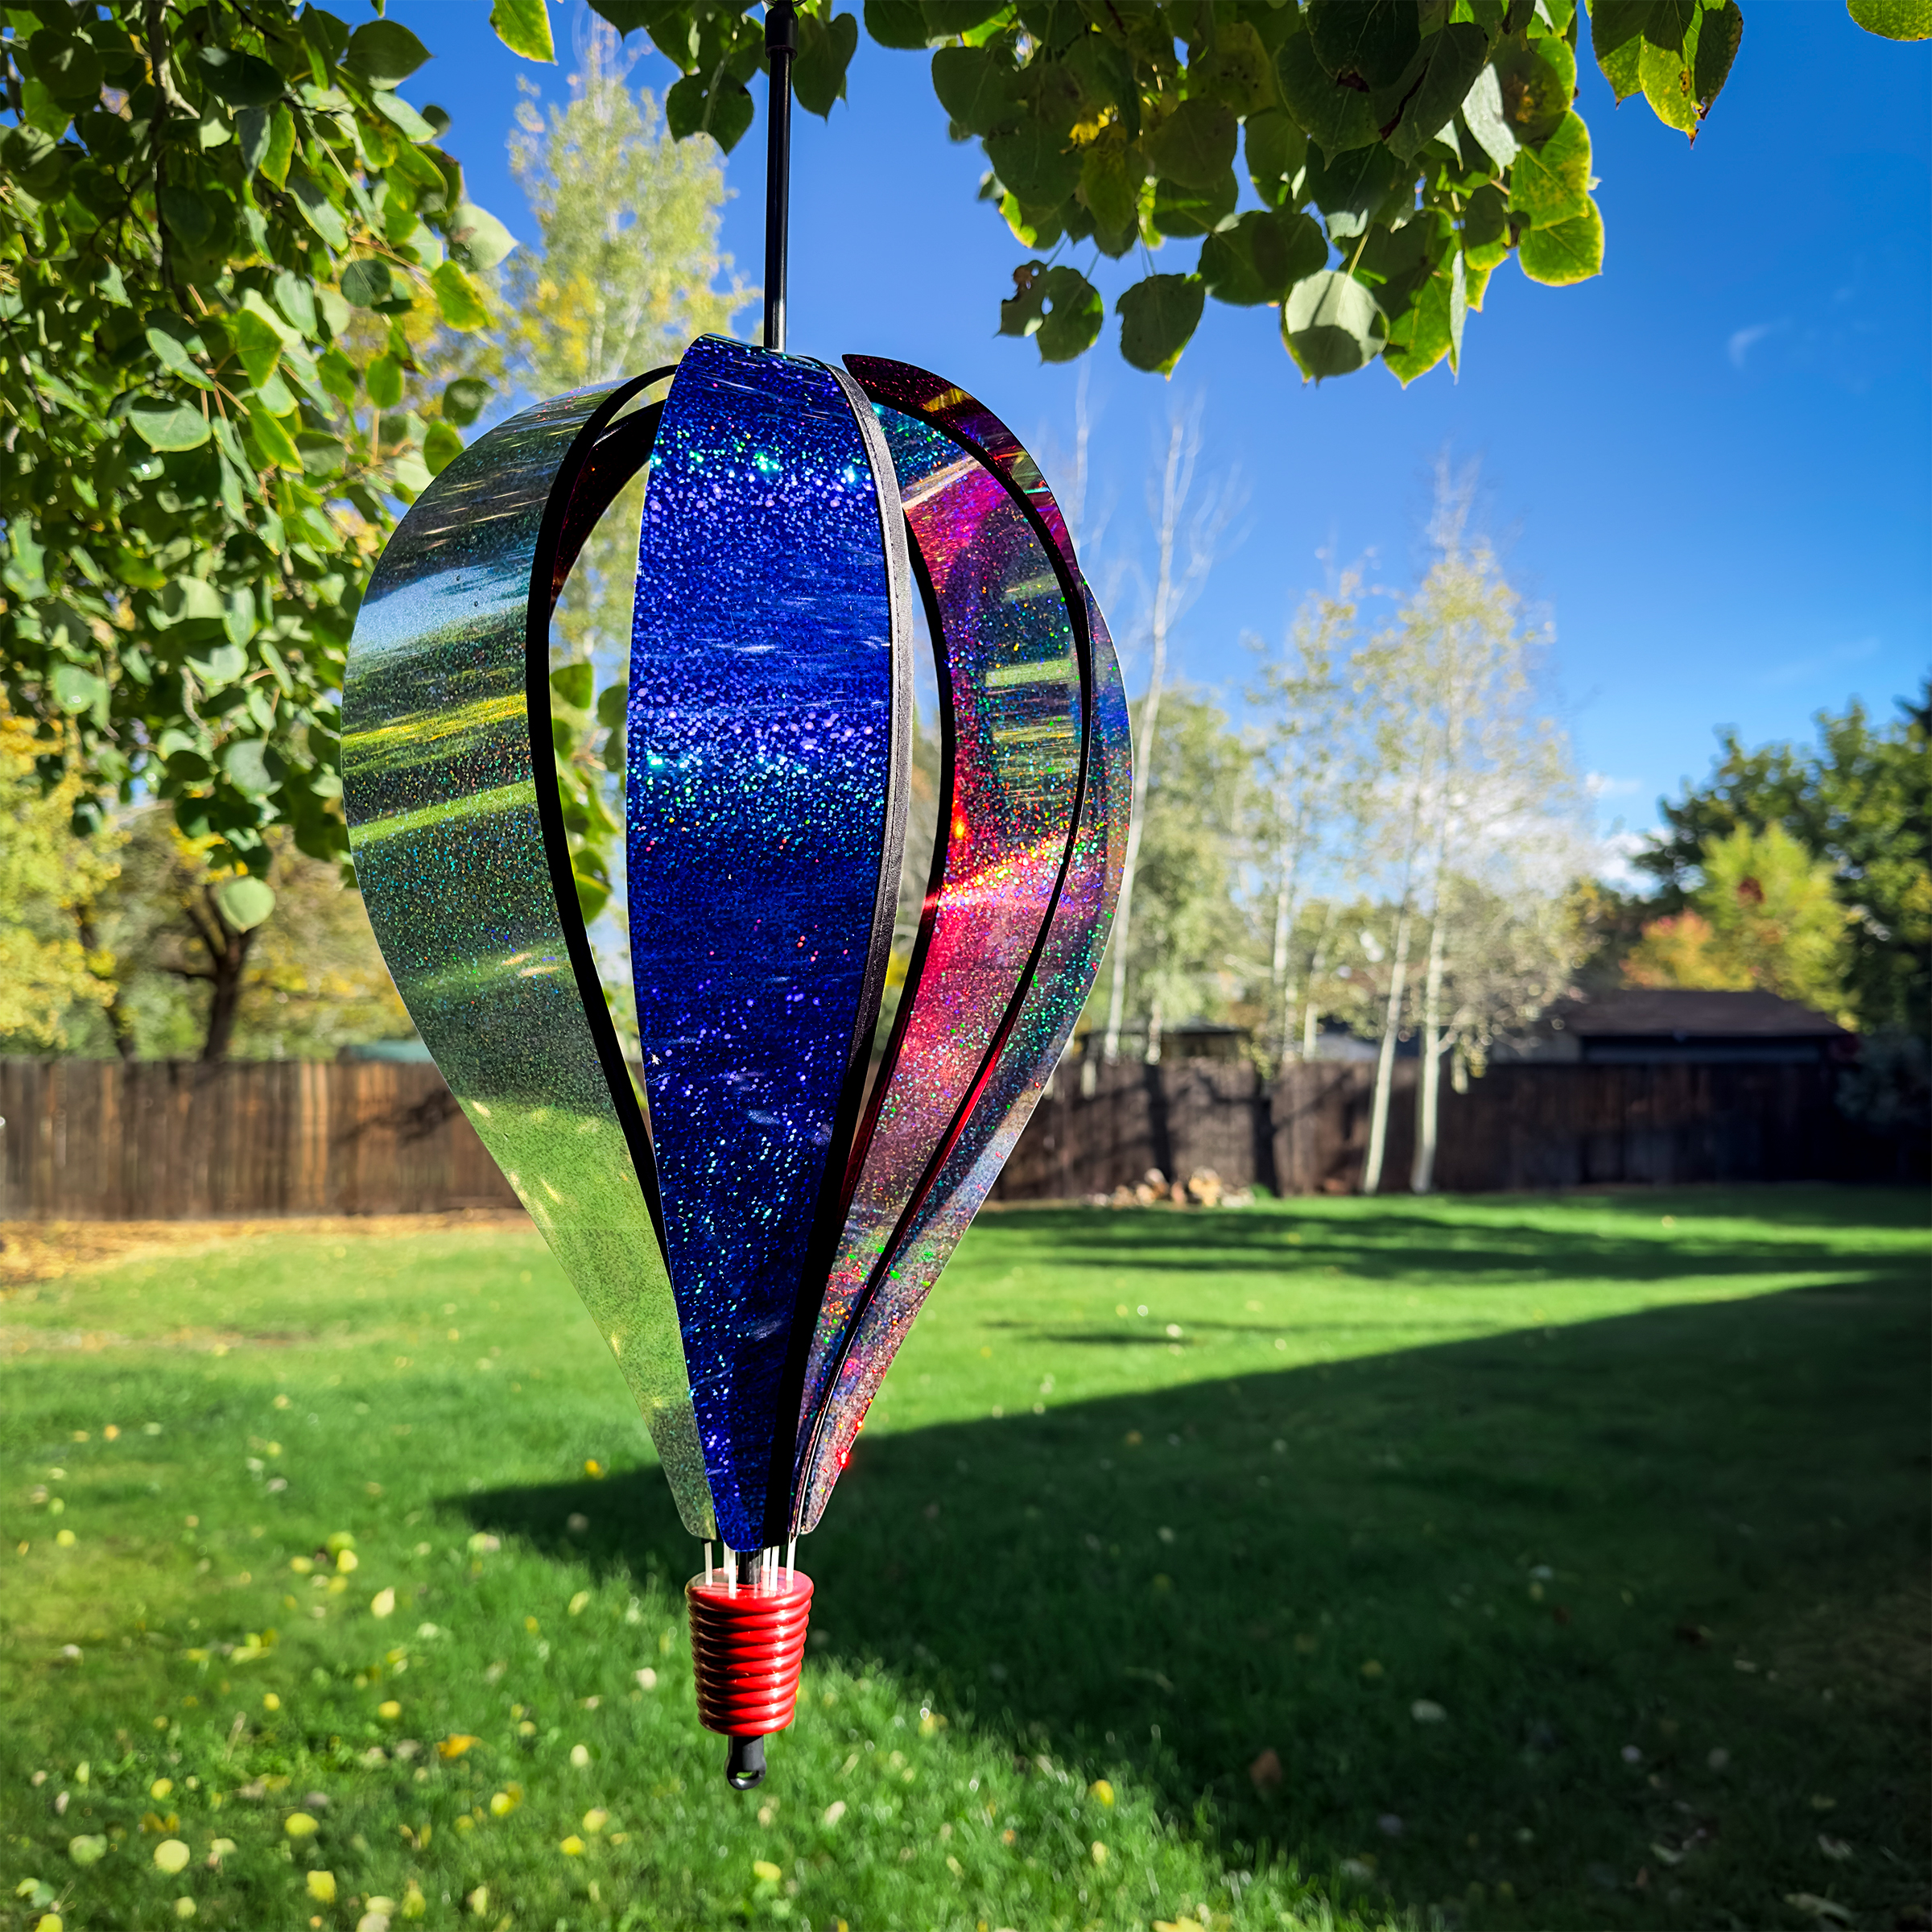 In the Breeze 1084 — Patriot Sparkler 6 Panel Hot Air Balloon 12"W x 18"H x 12"D, Colorful Mylar Patriotic Garden Spinner - image 3 of 4